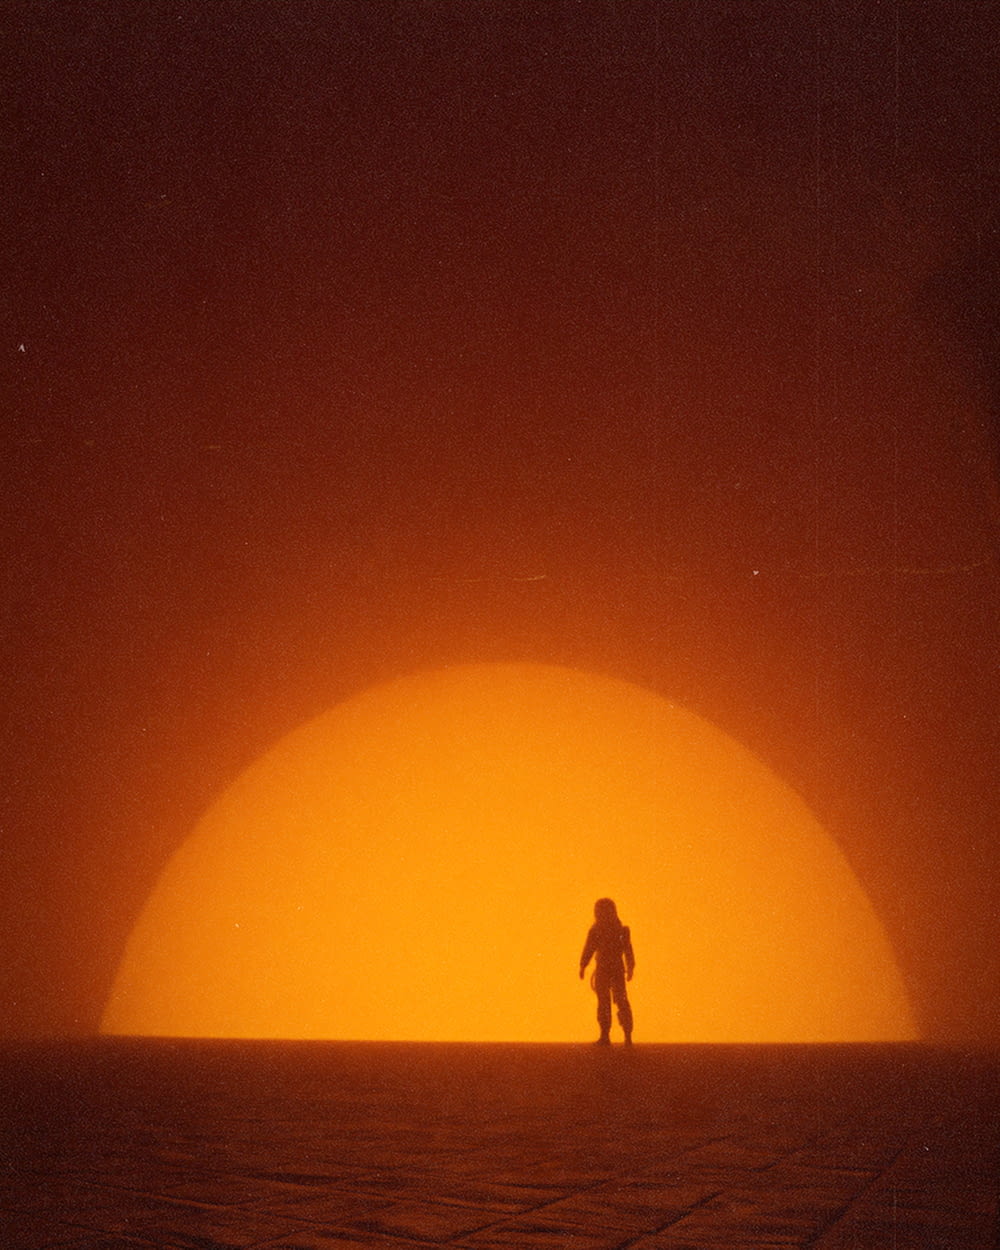 a person standing in front of a large orange moon